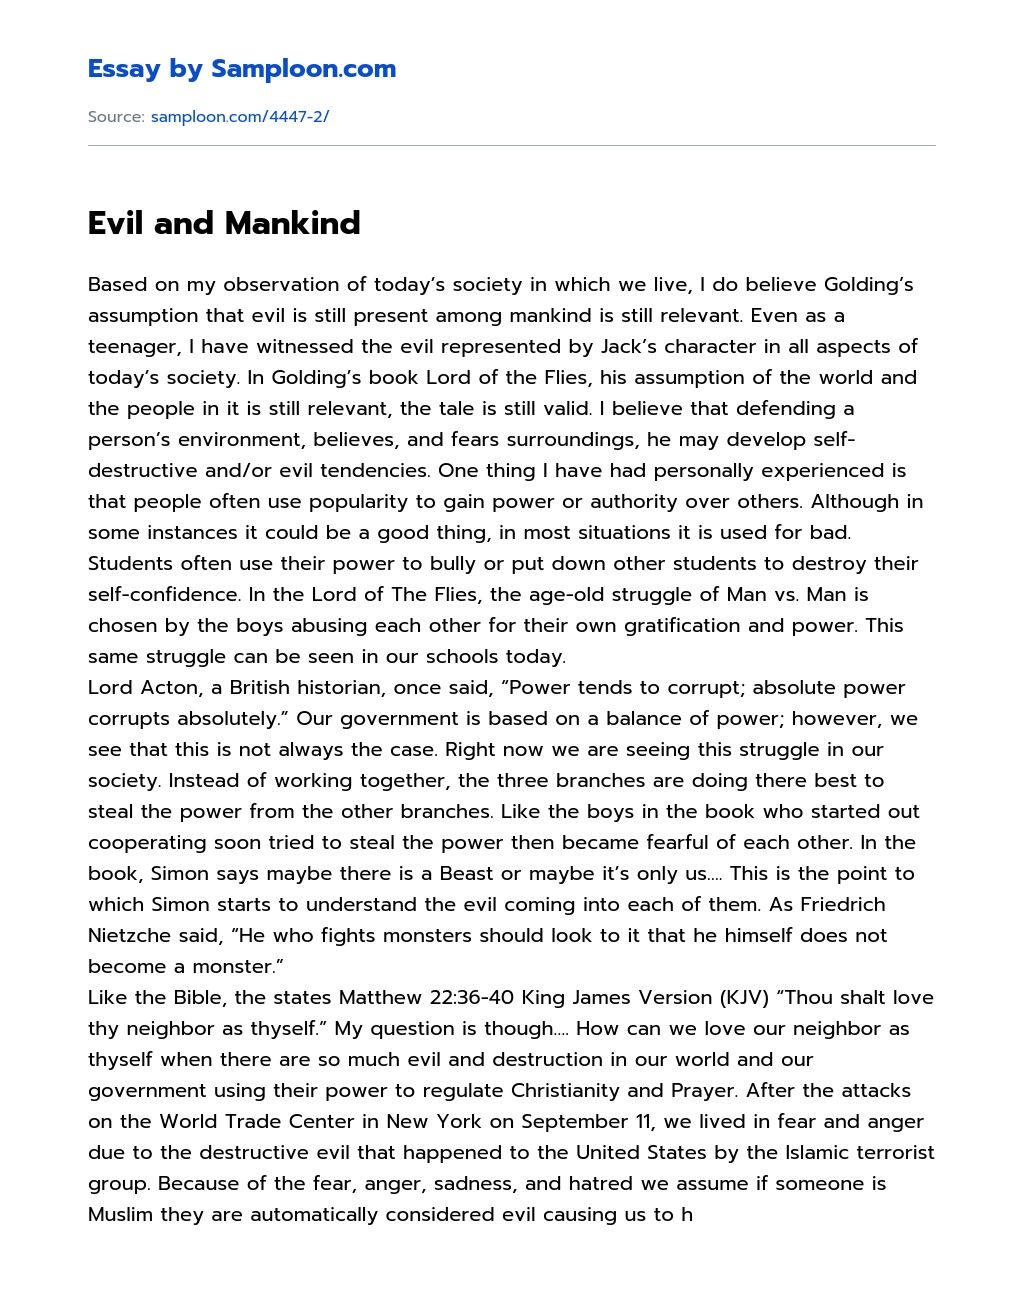 Evil and Mankind essay